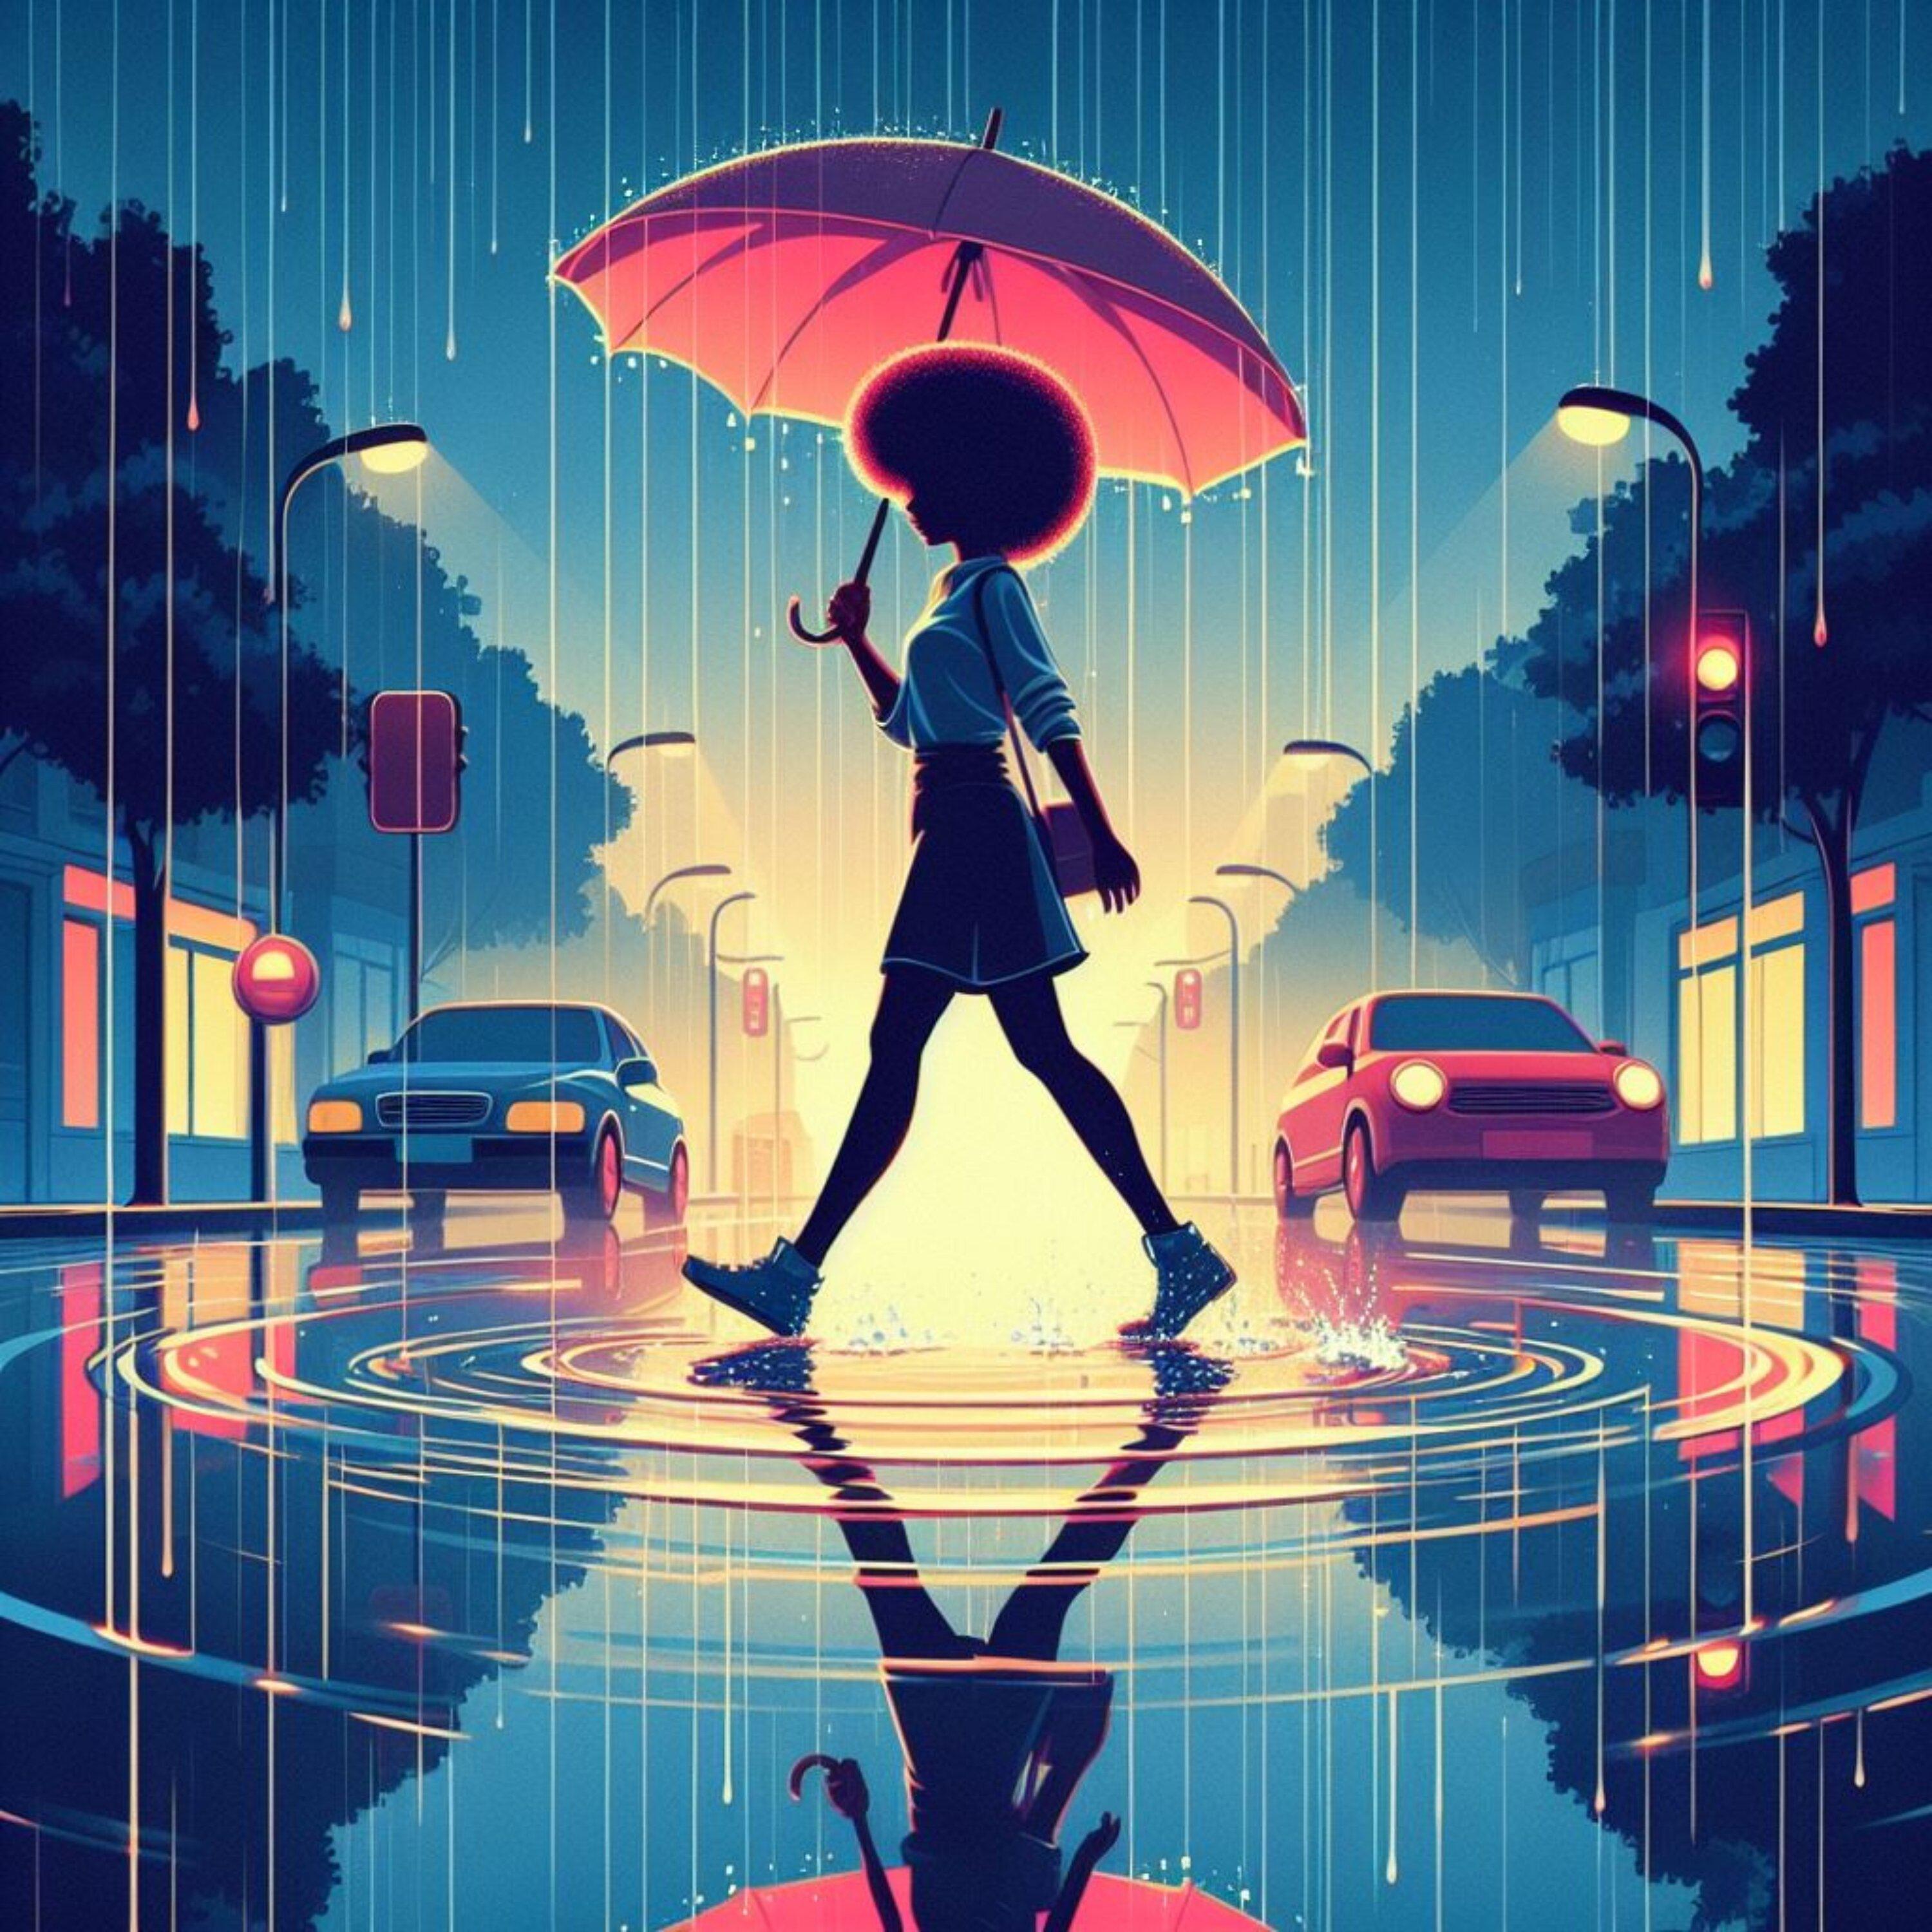 Raina Meadows - Strong Background Rain for Relaxing, Sleeping, Studying, Working 6